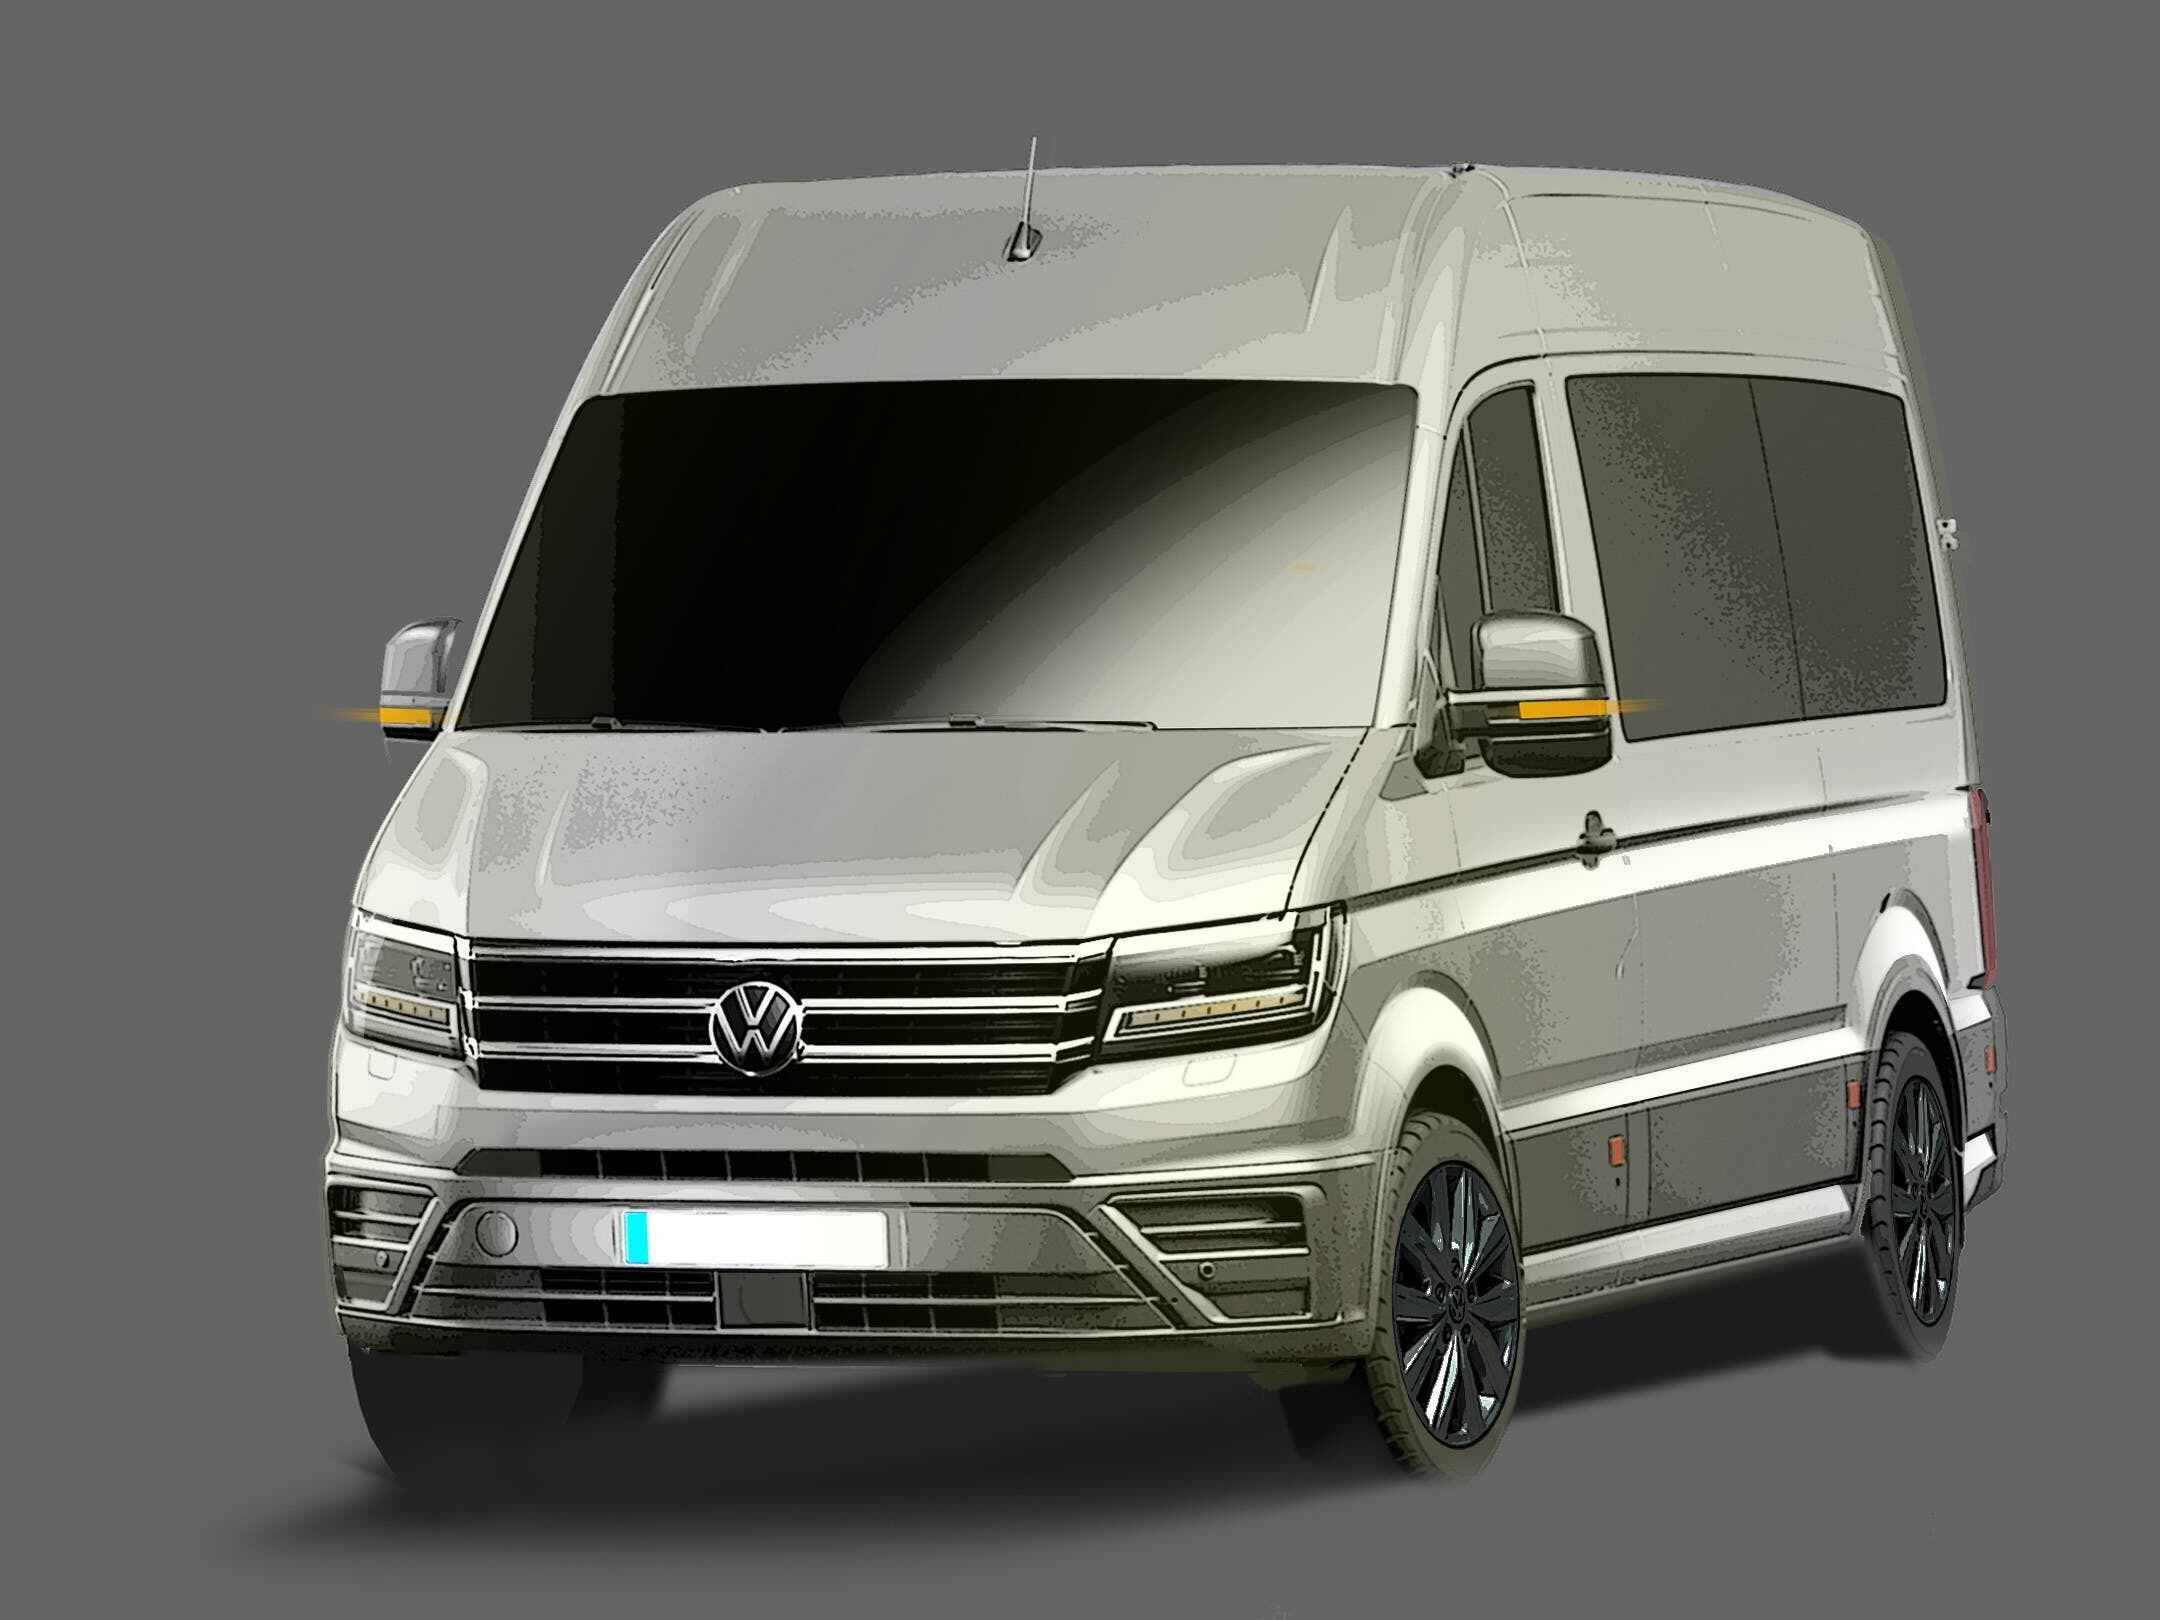 Volkswagen reveals first details of upcoming Crafter